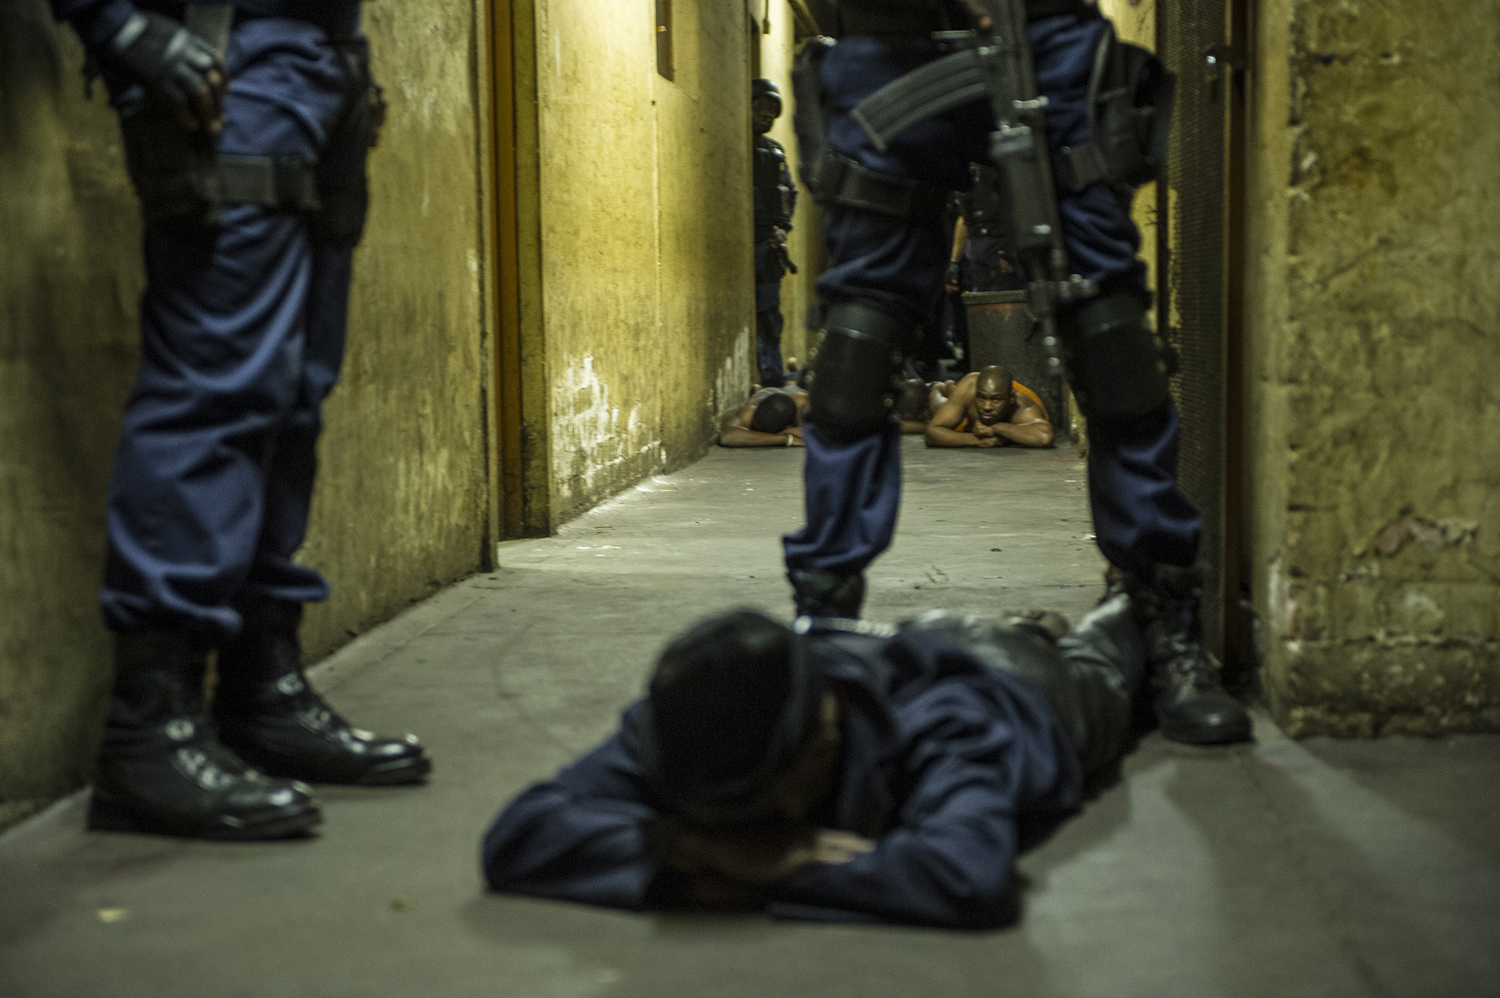 South African police officers and troops of the South African Defence Force raid the Jeppie hostels in the Jeppestown district of Johannesburg late on April 21, 2015 (Mujahid Safodien — AFP/Getty Images)